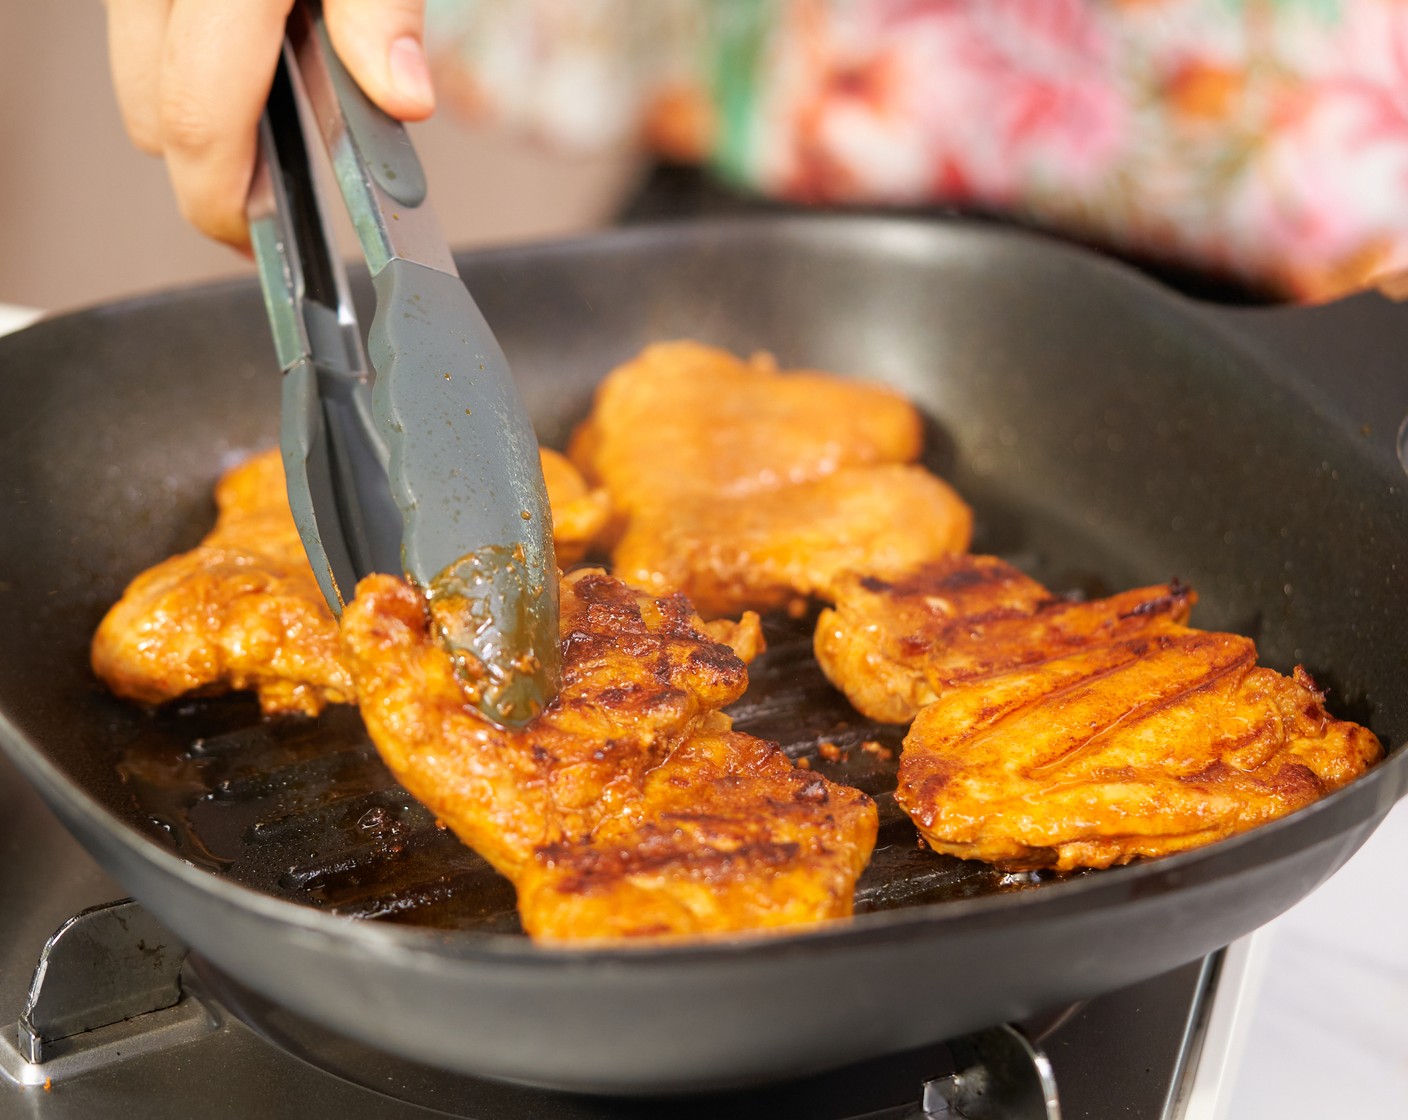 step 5 In a grill pan over medium-high heat, add Vegetable Oil (1/2 Tbsp). Once hot, cook the chicken for around 5 minutes on each side.